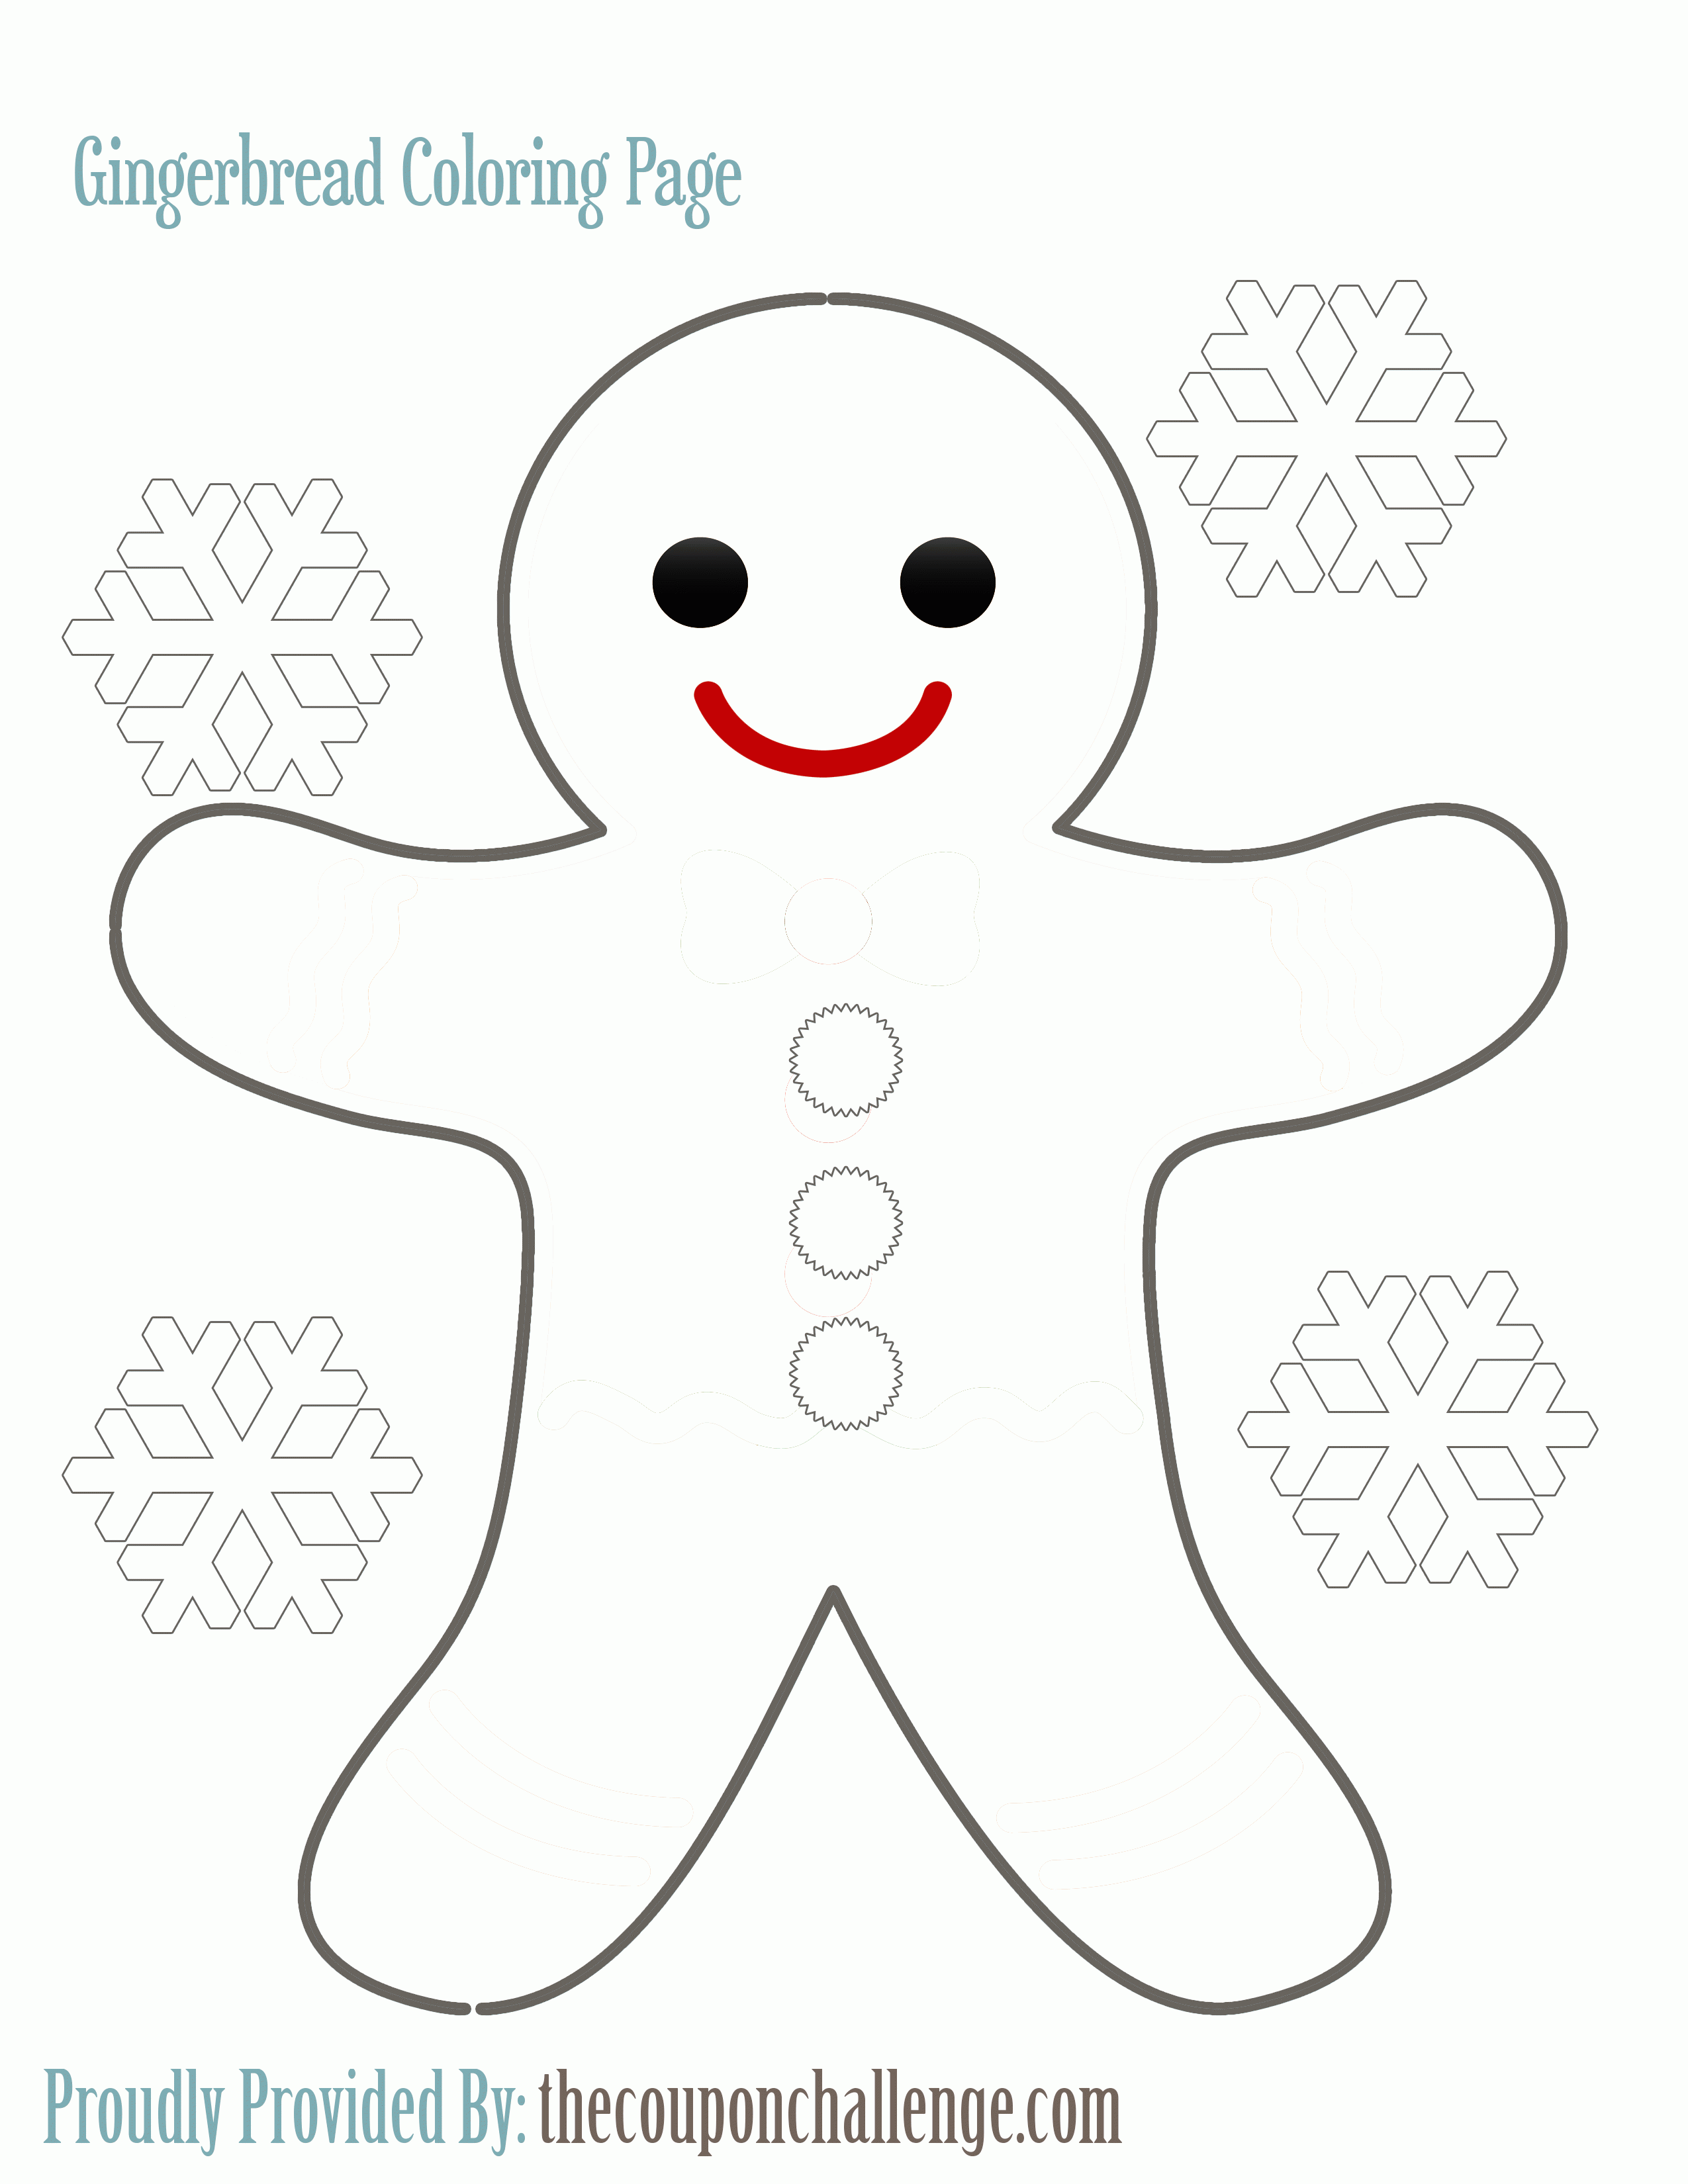 Color By Number Gingerbread Man Coloring Pages - Coloring Pages ...